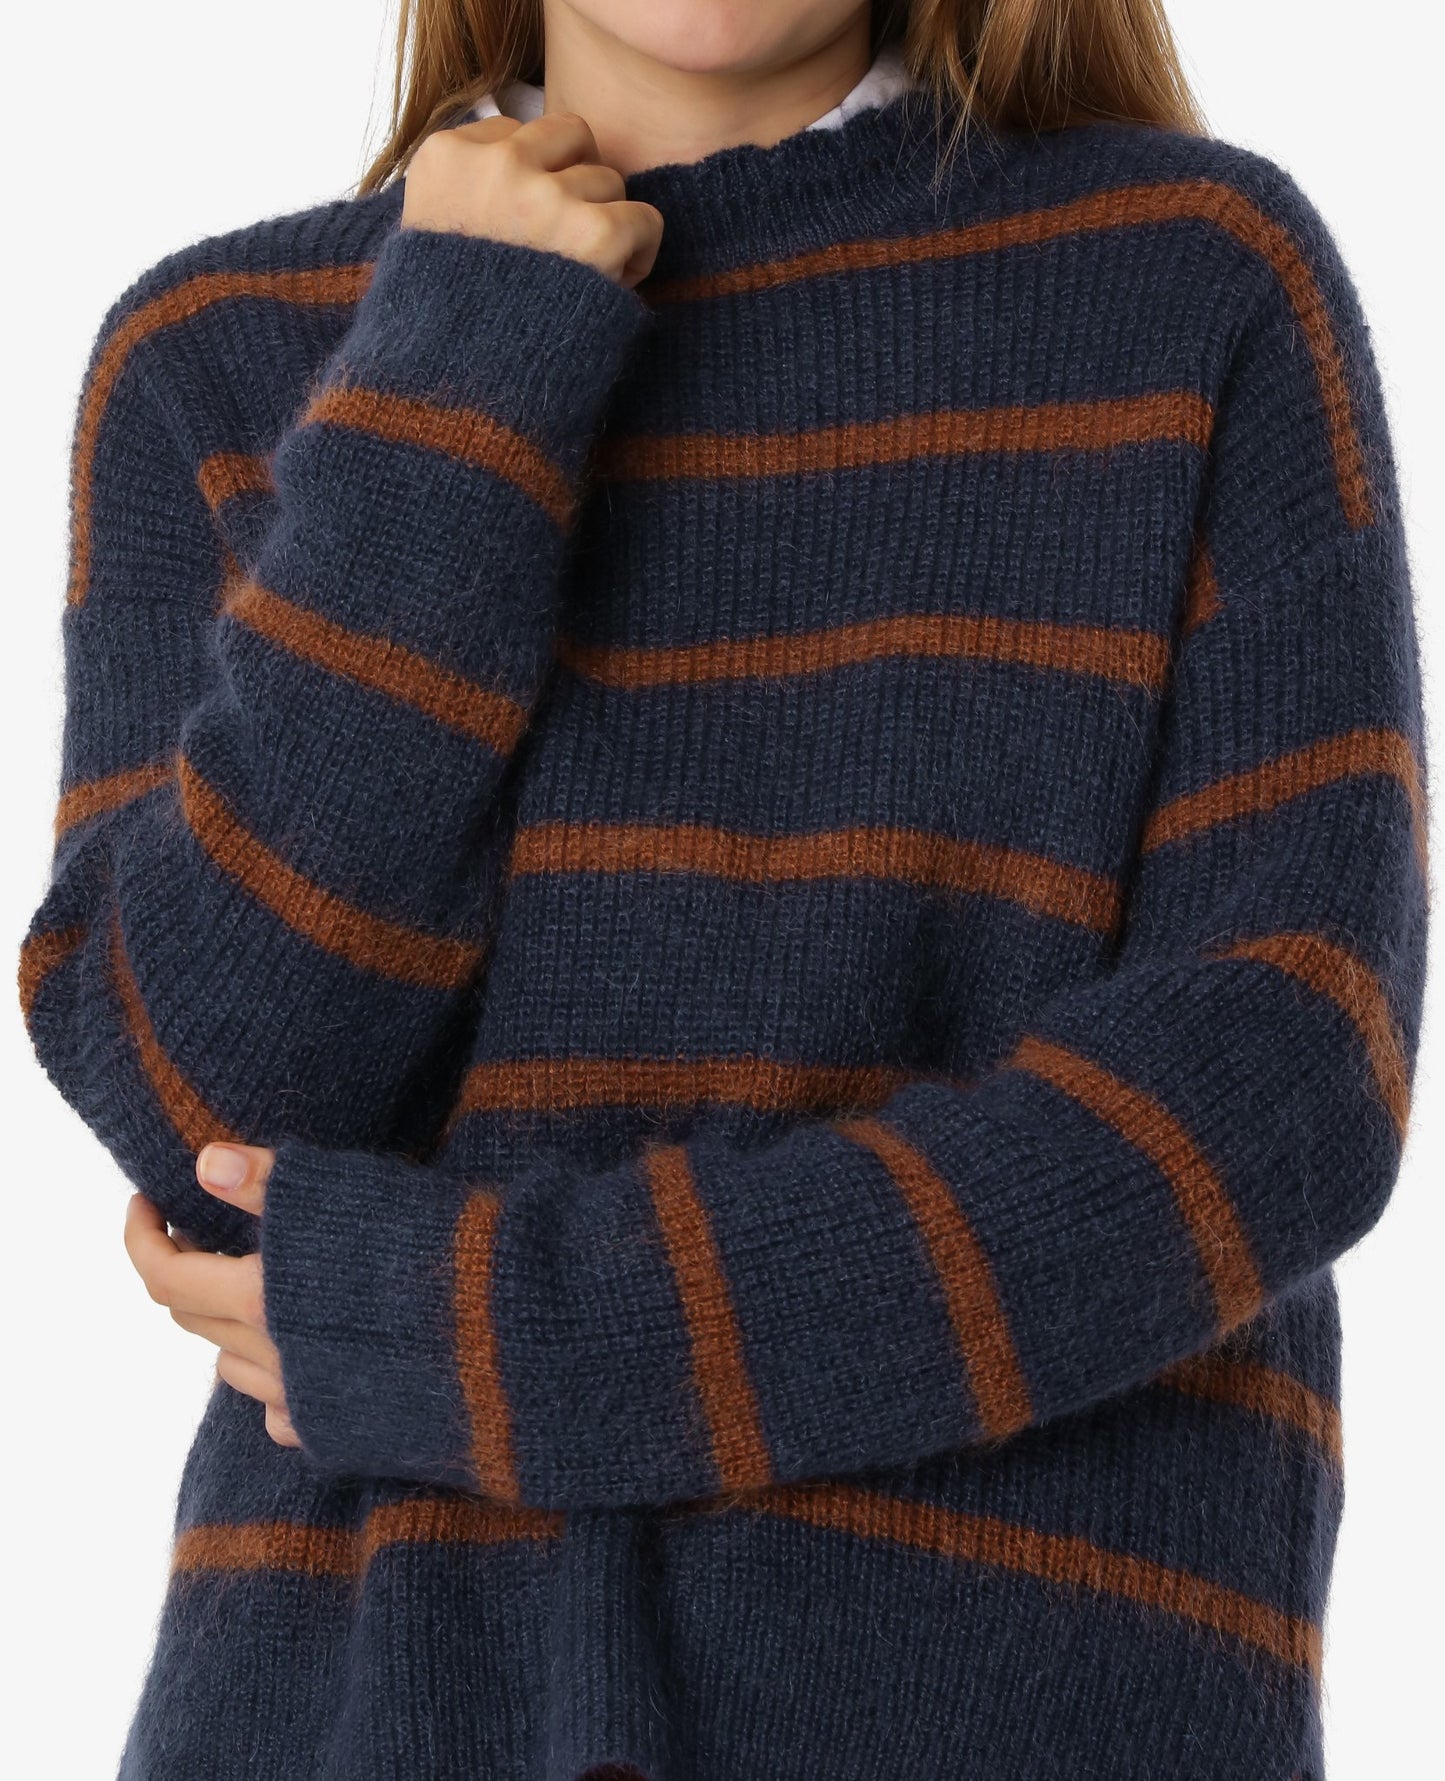 SOFT CABLE KNIT PULLOVER